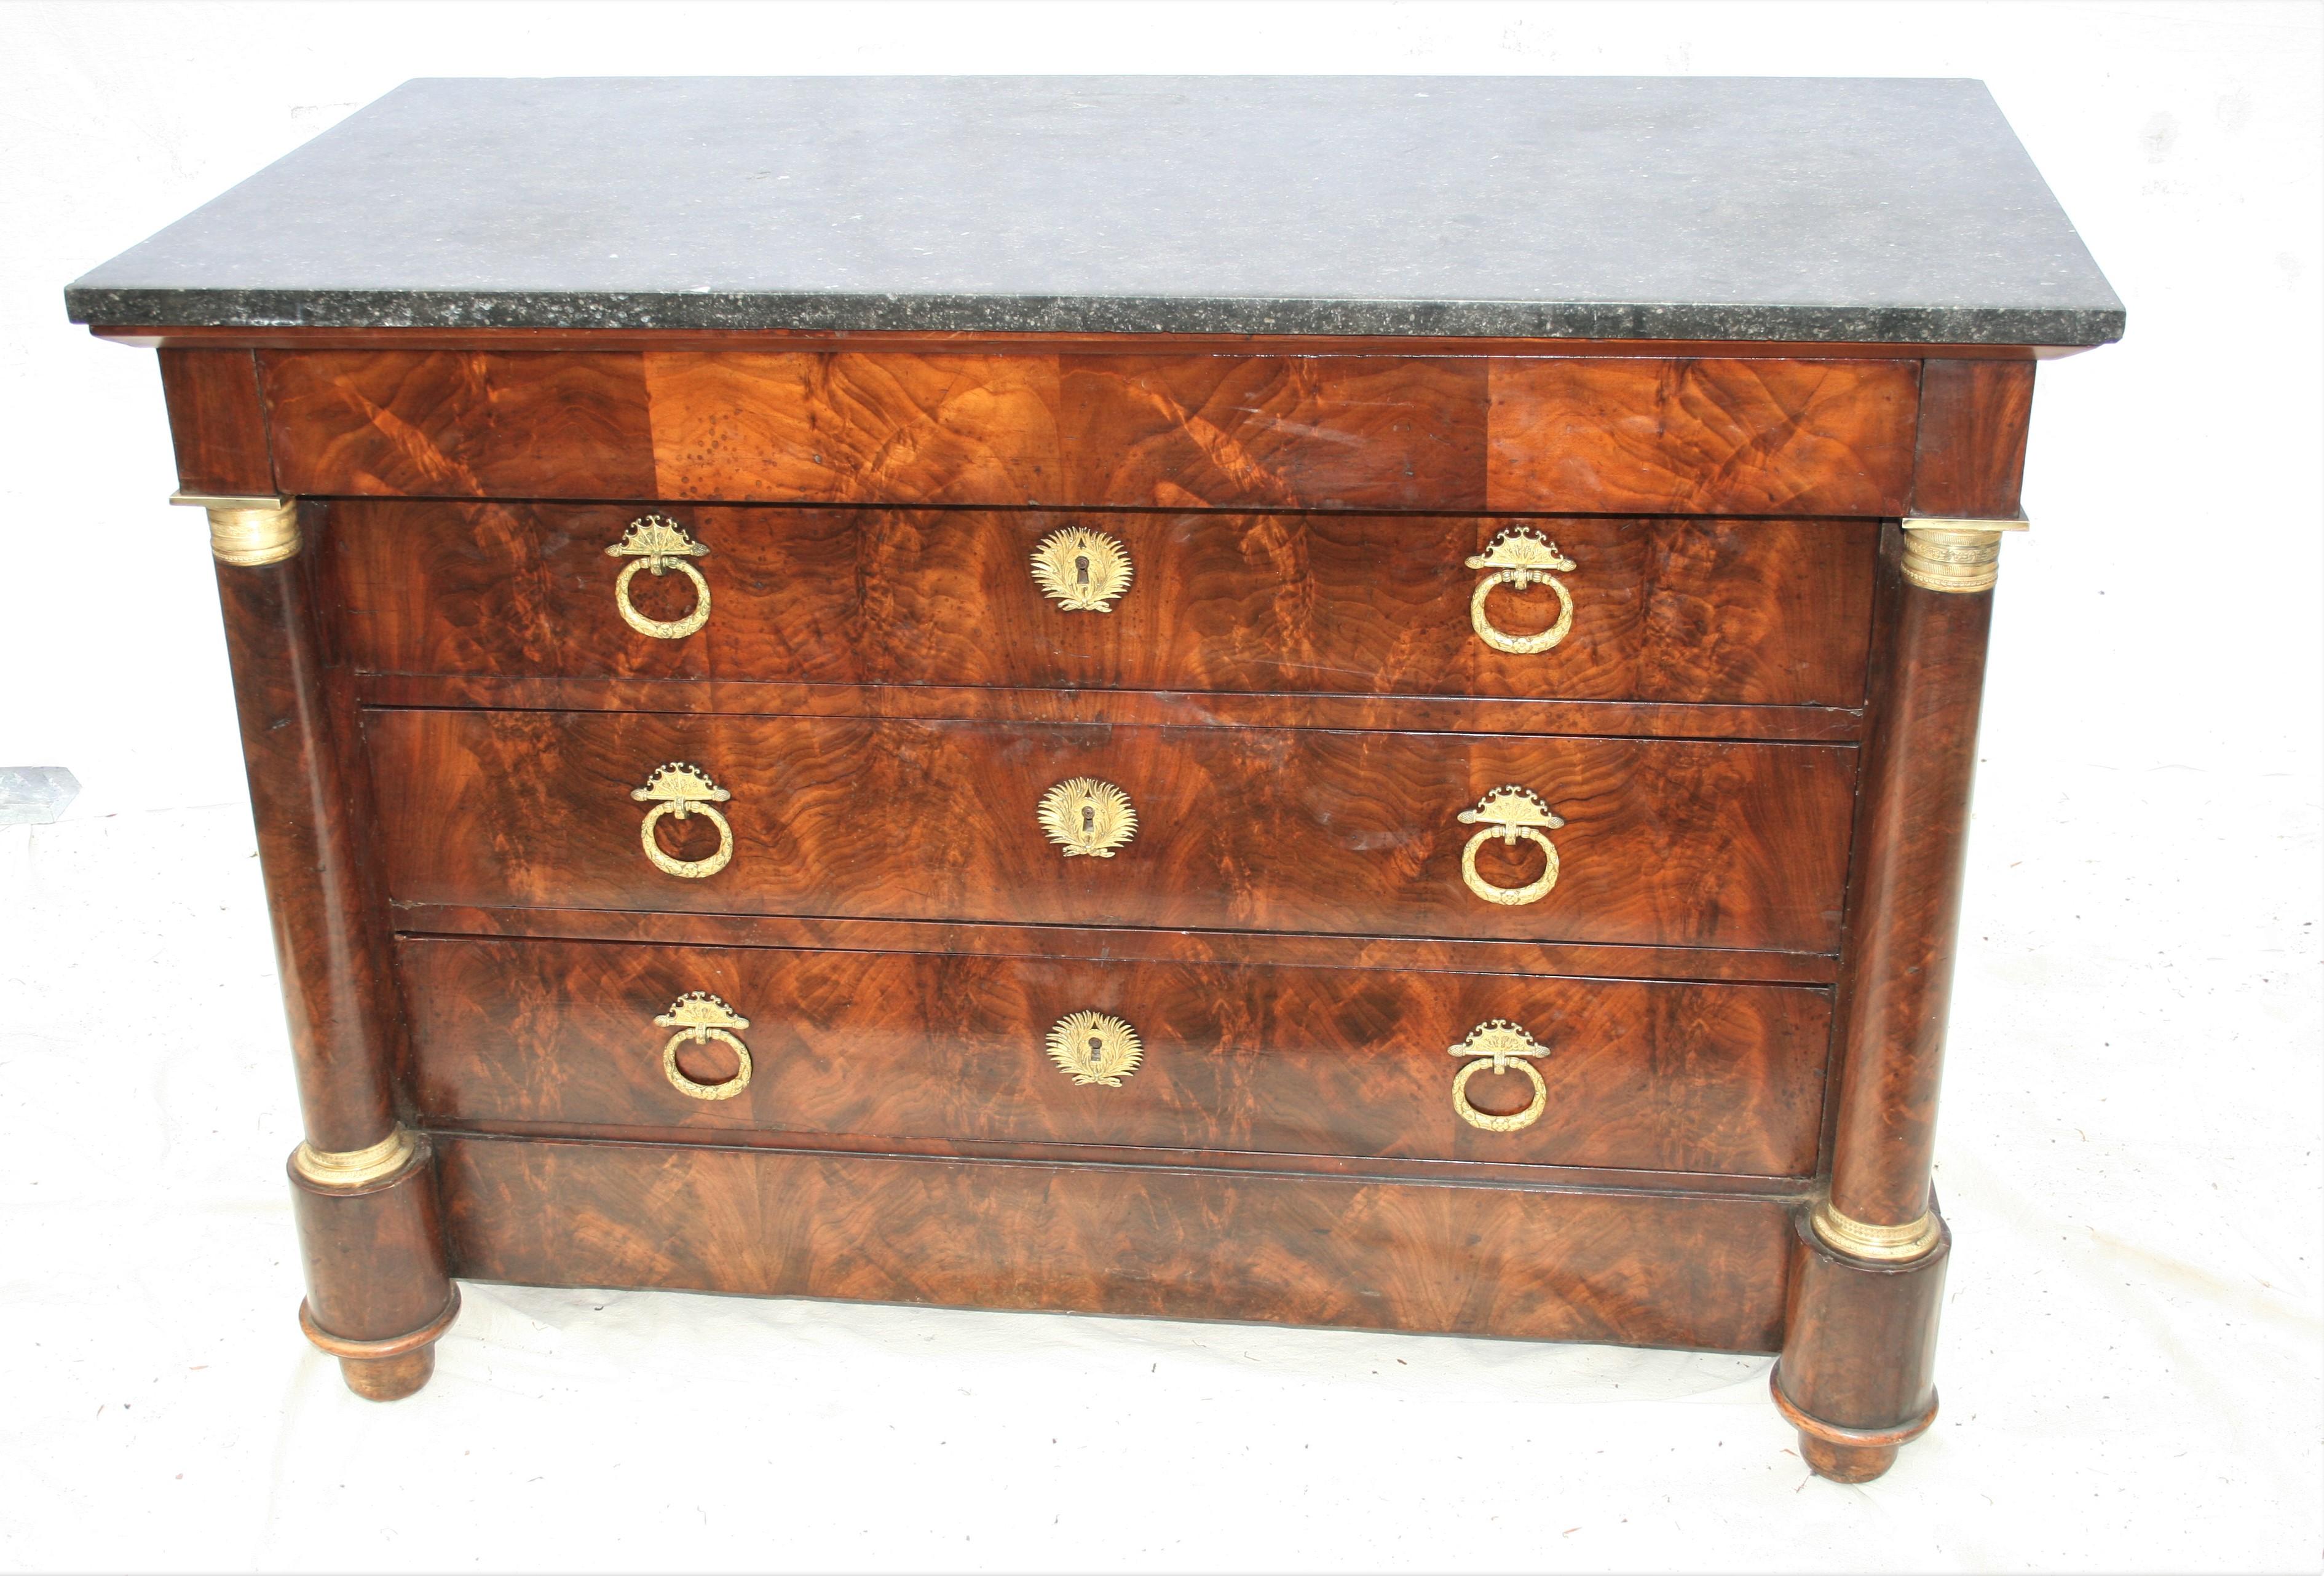 Period French mahogany commode with very good ormolu mounts and handles, solid oak carcass and original fossilized marble top , circa 1810.